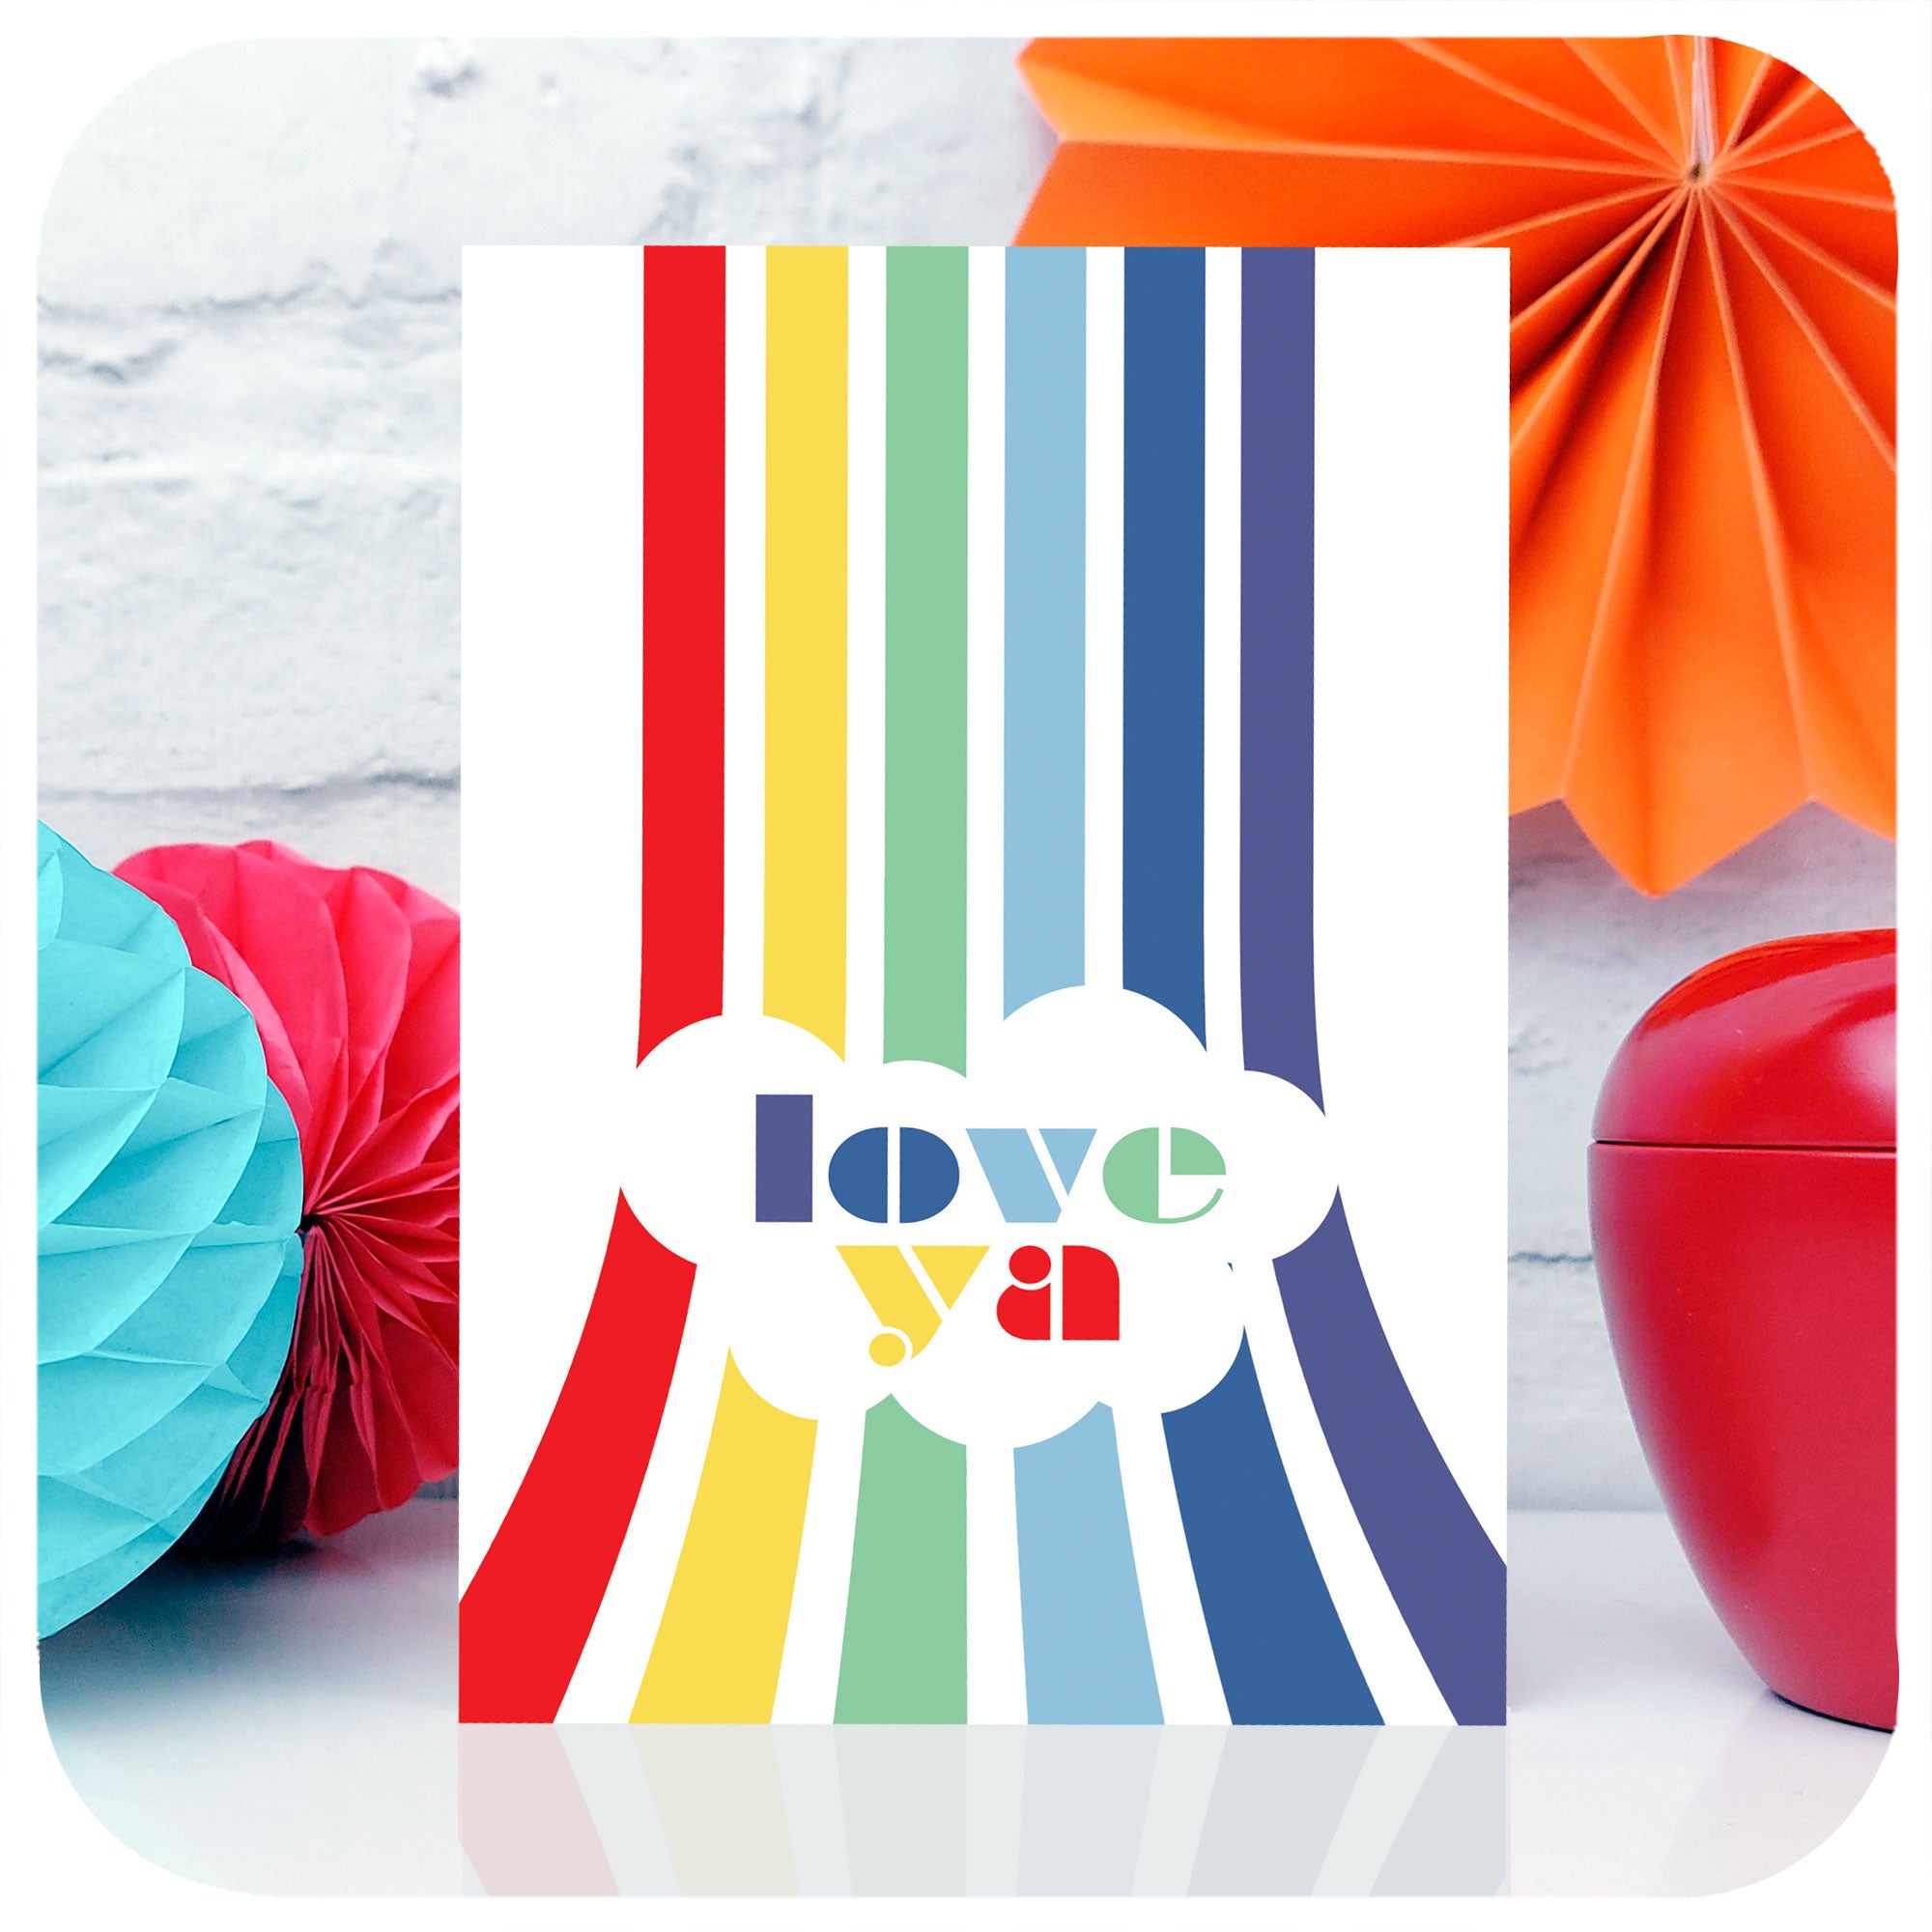 An A6 greetings card featuring a vertical rainbow with the words "Love Ya" stands on a white table with colourful party decorations | The Inkabilly Emporium